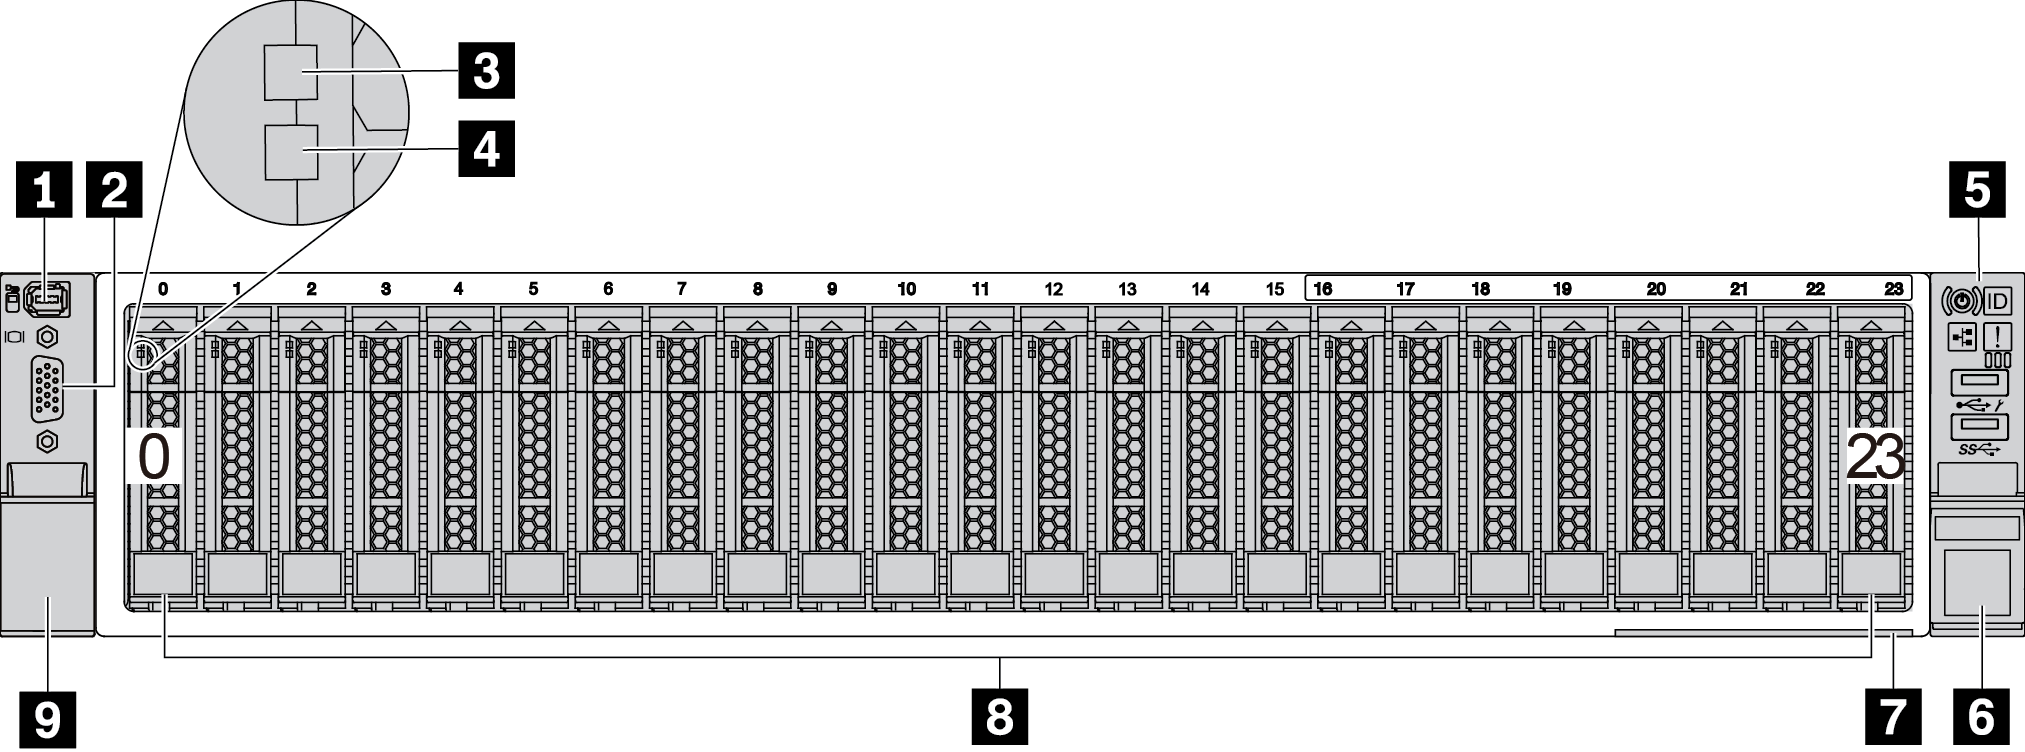 Front view of server models with twenty-four 2.5-inch front drive bays